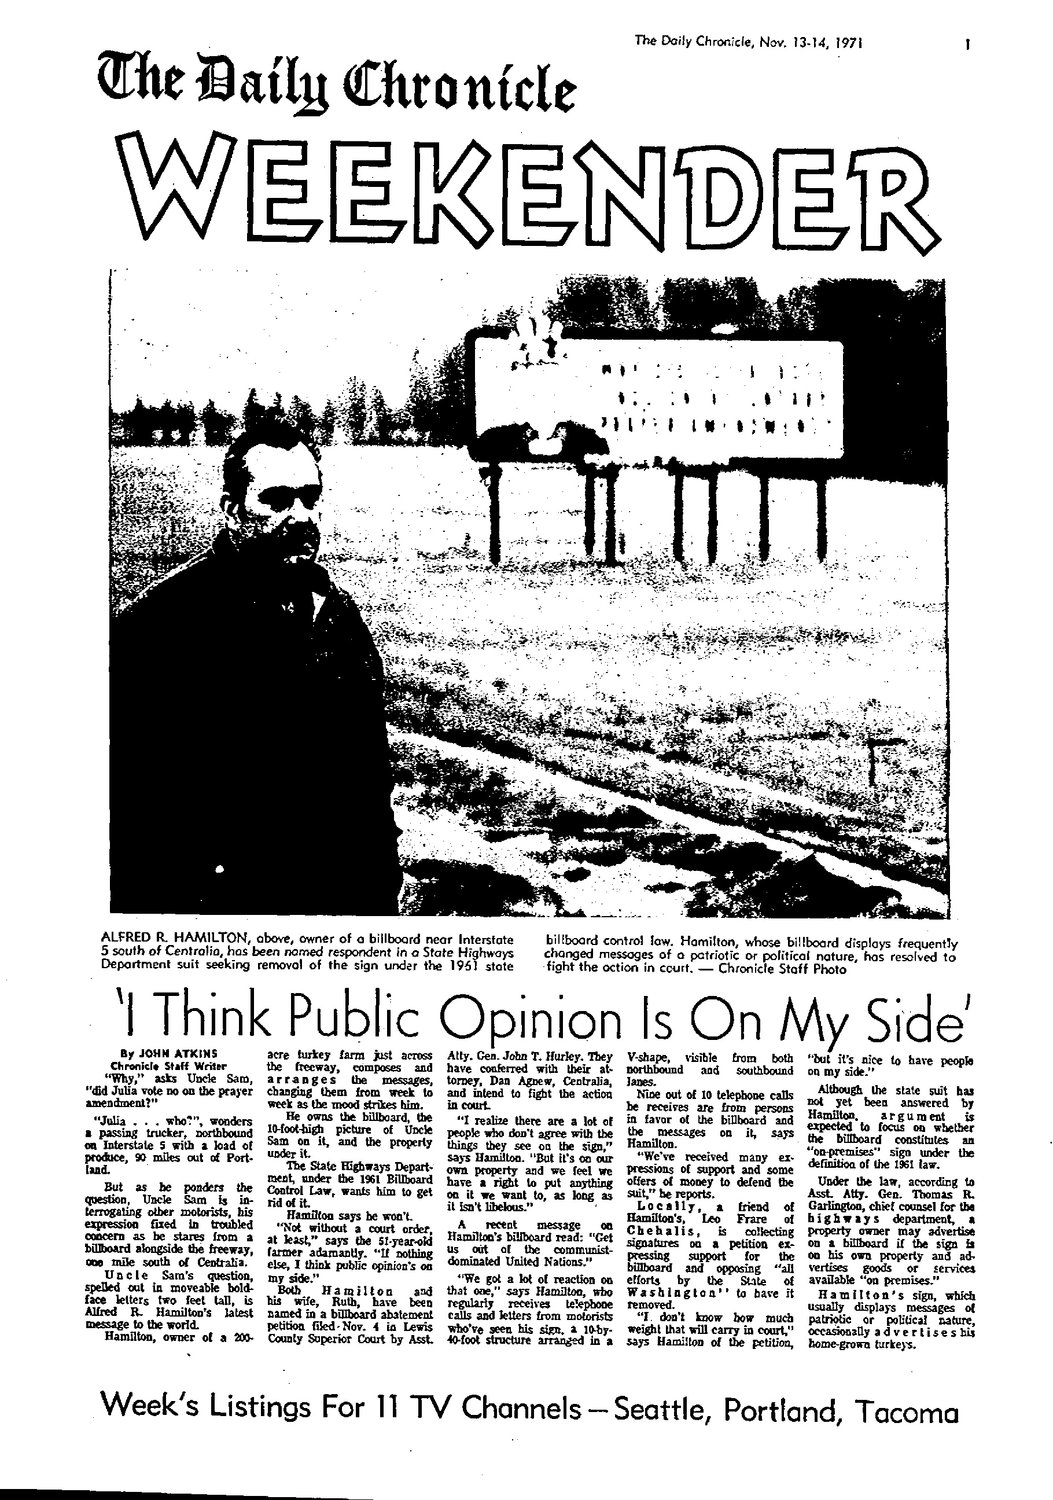 The Chronicle Weekender, November 1971: "I Think Public Opinion Is On My Side"